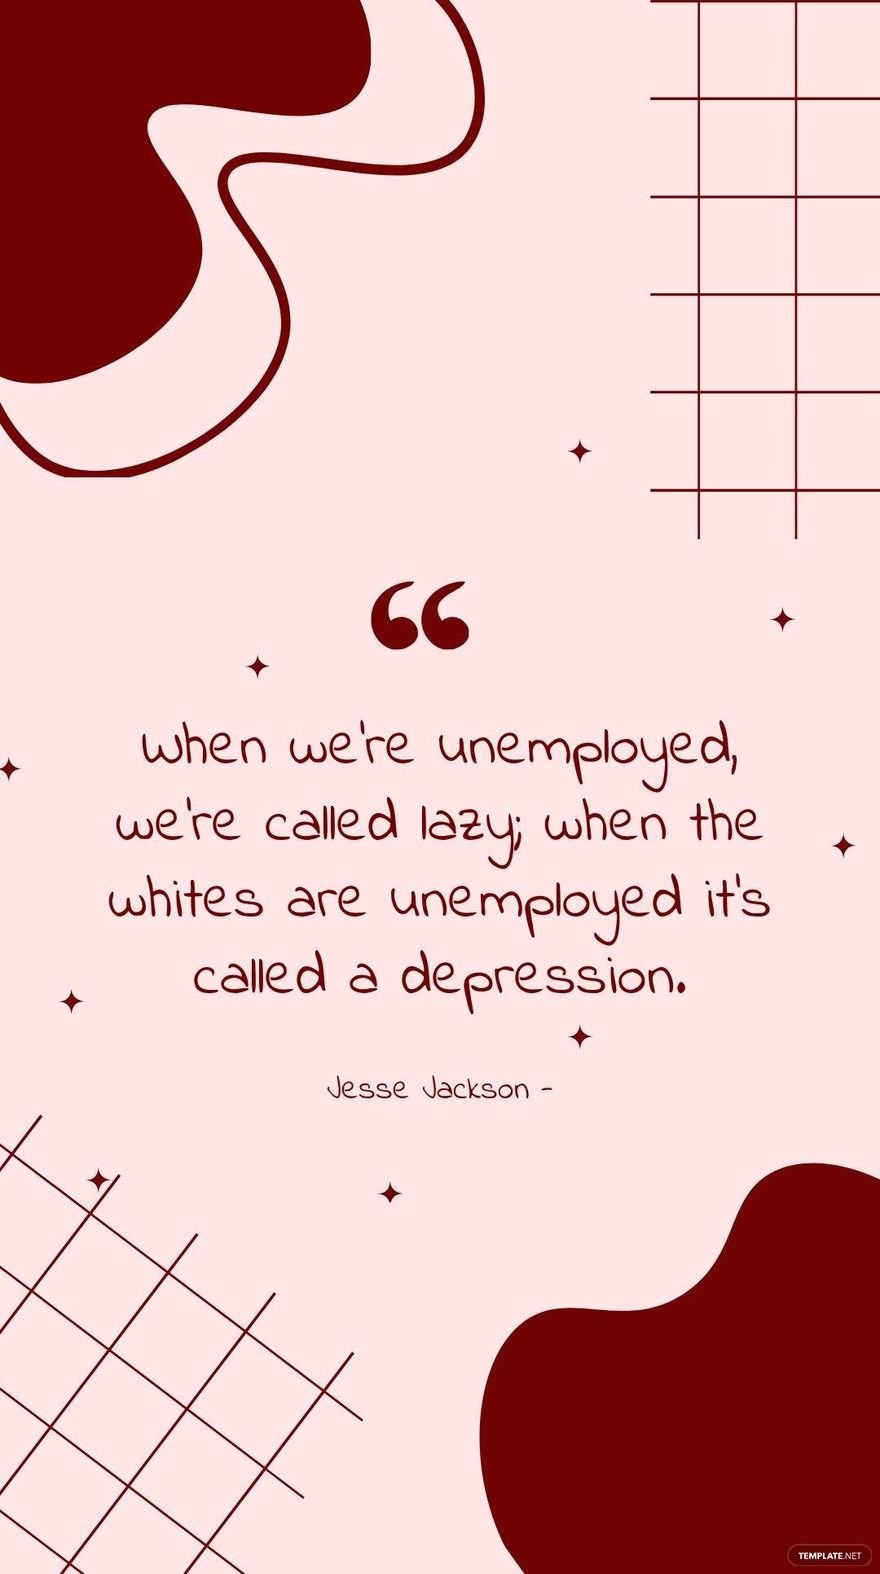 Jesse Jackson - When we're unemployed, we're called lazy; when the whites are unemployed it's called a depression.